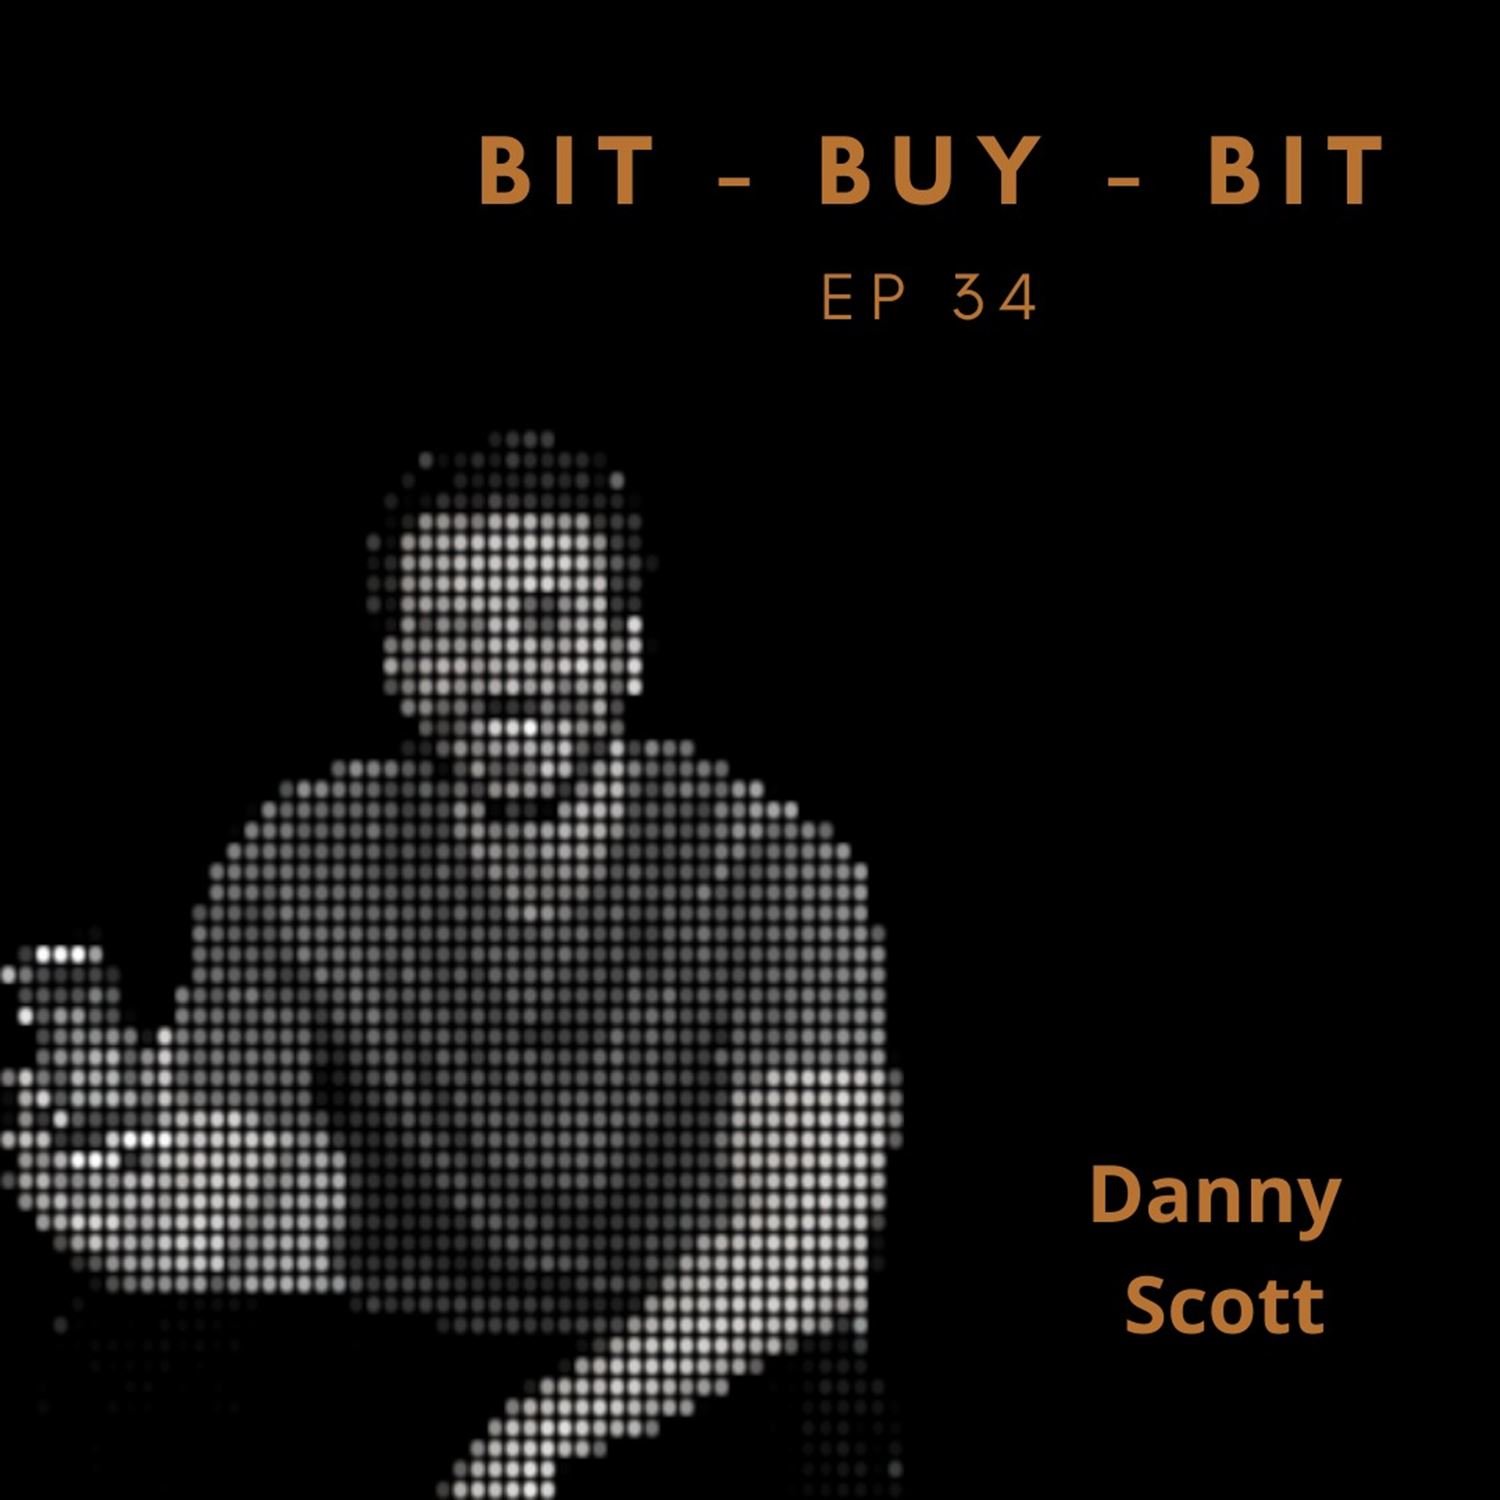 EP34 Bitcoin podcast with Danny Scott the CEO of UK Bitcoin Exchange CoinCorner.